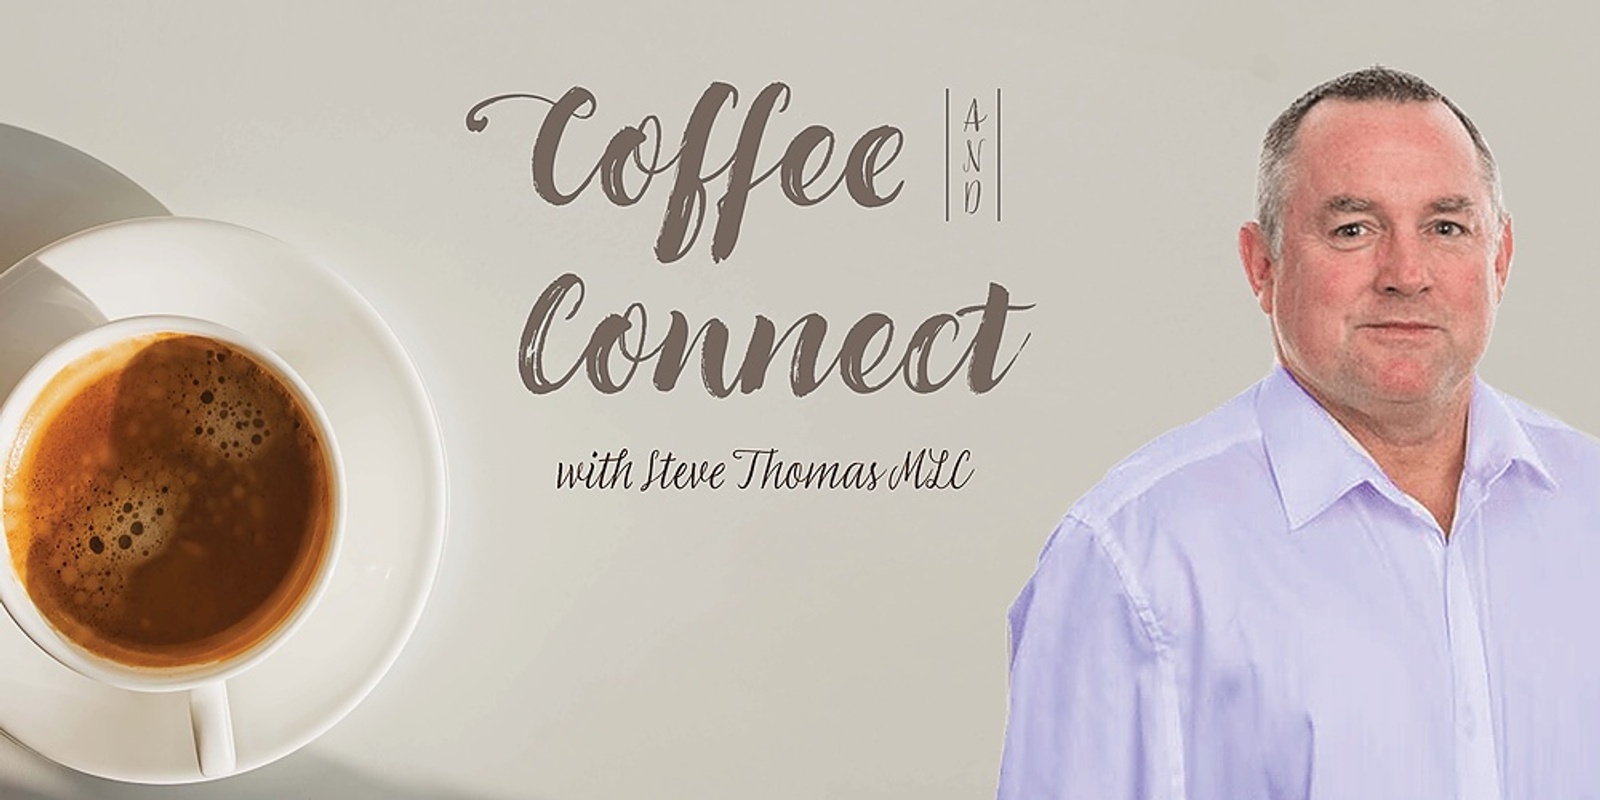 Banner image for Coffee and Connect with Steve Thomas MLC